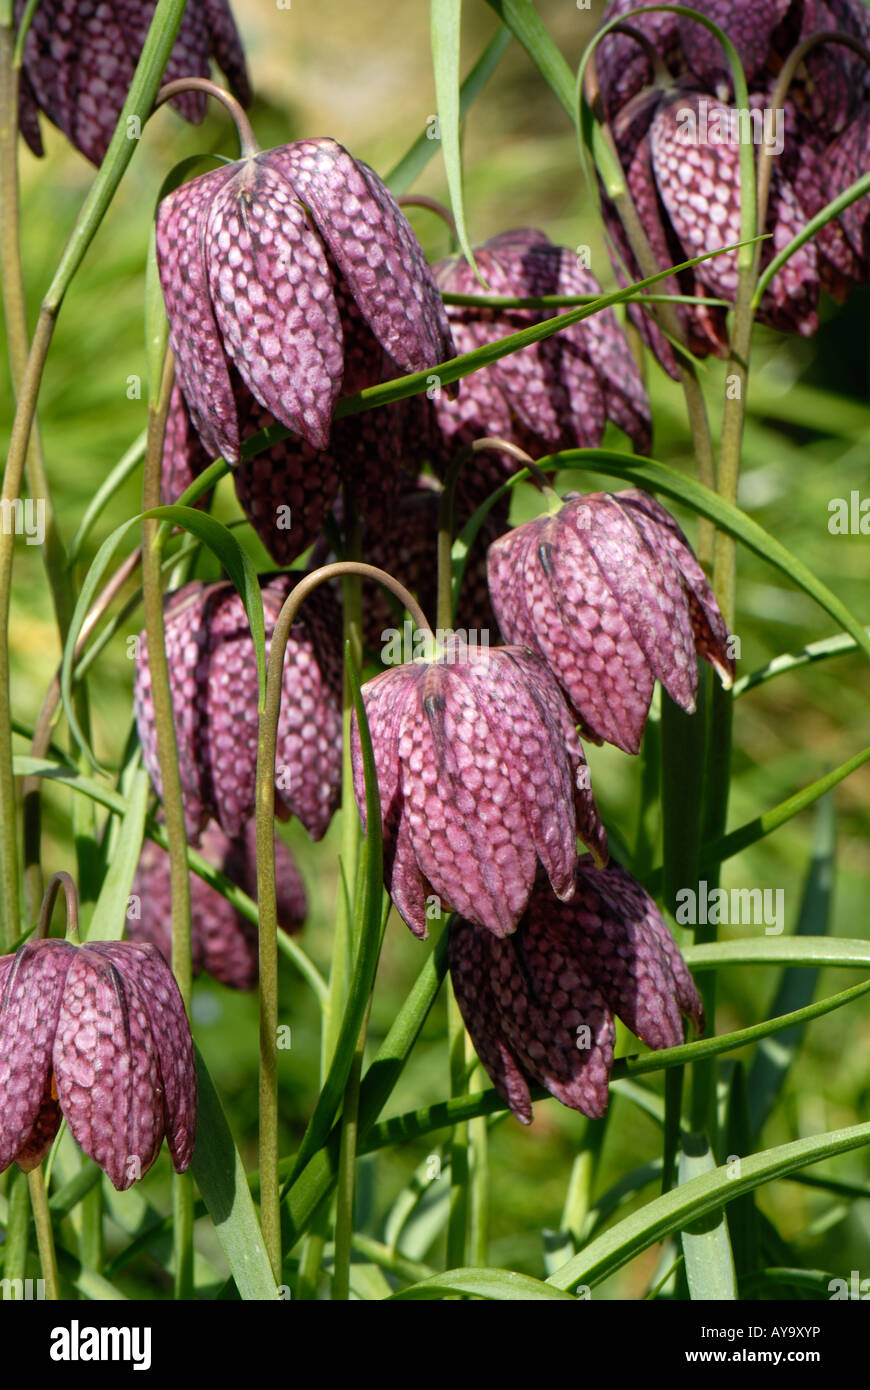 Snakes head fritillary Fritillaria meleagris flowering in a small group Stock Photo